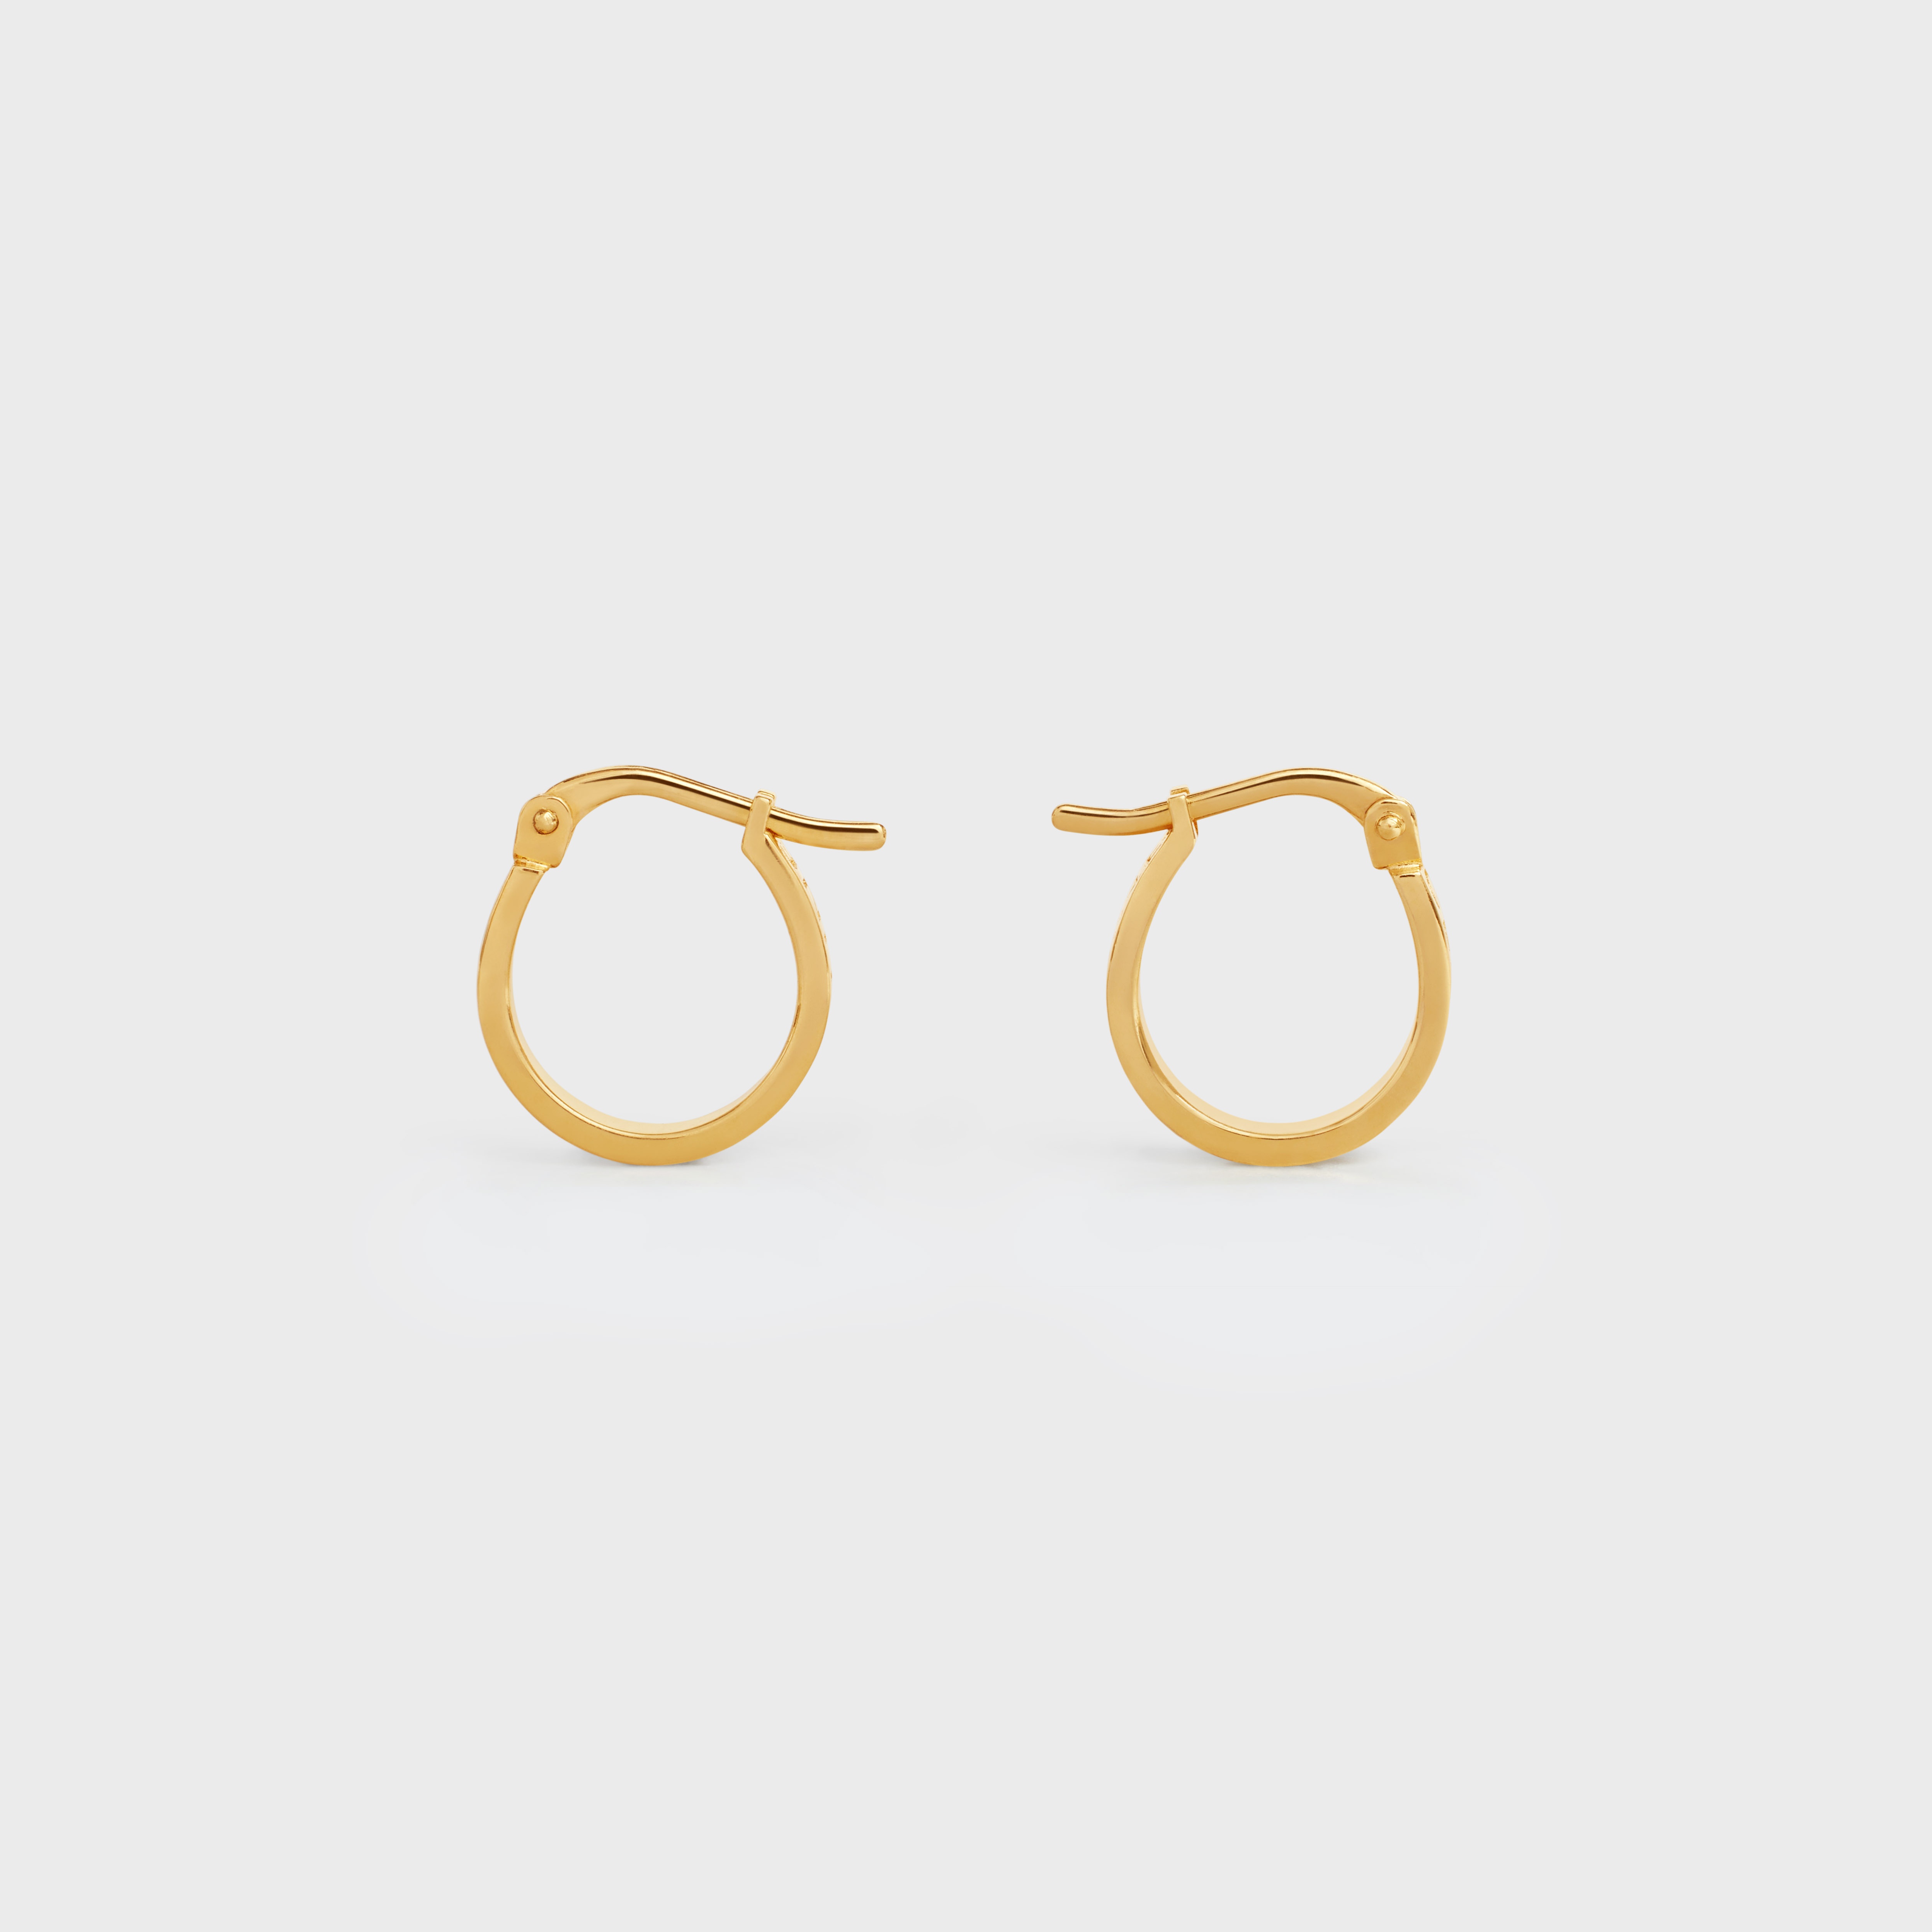 Celine Paris Hoops in Brass with Gold Finish - 1